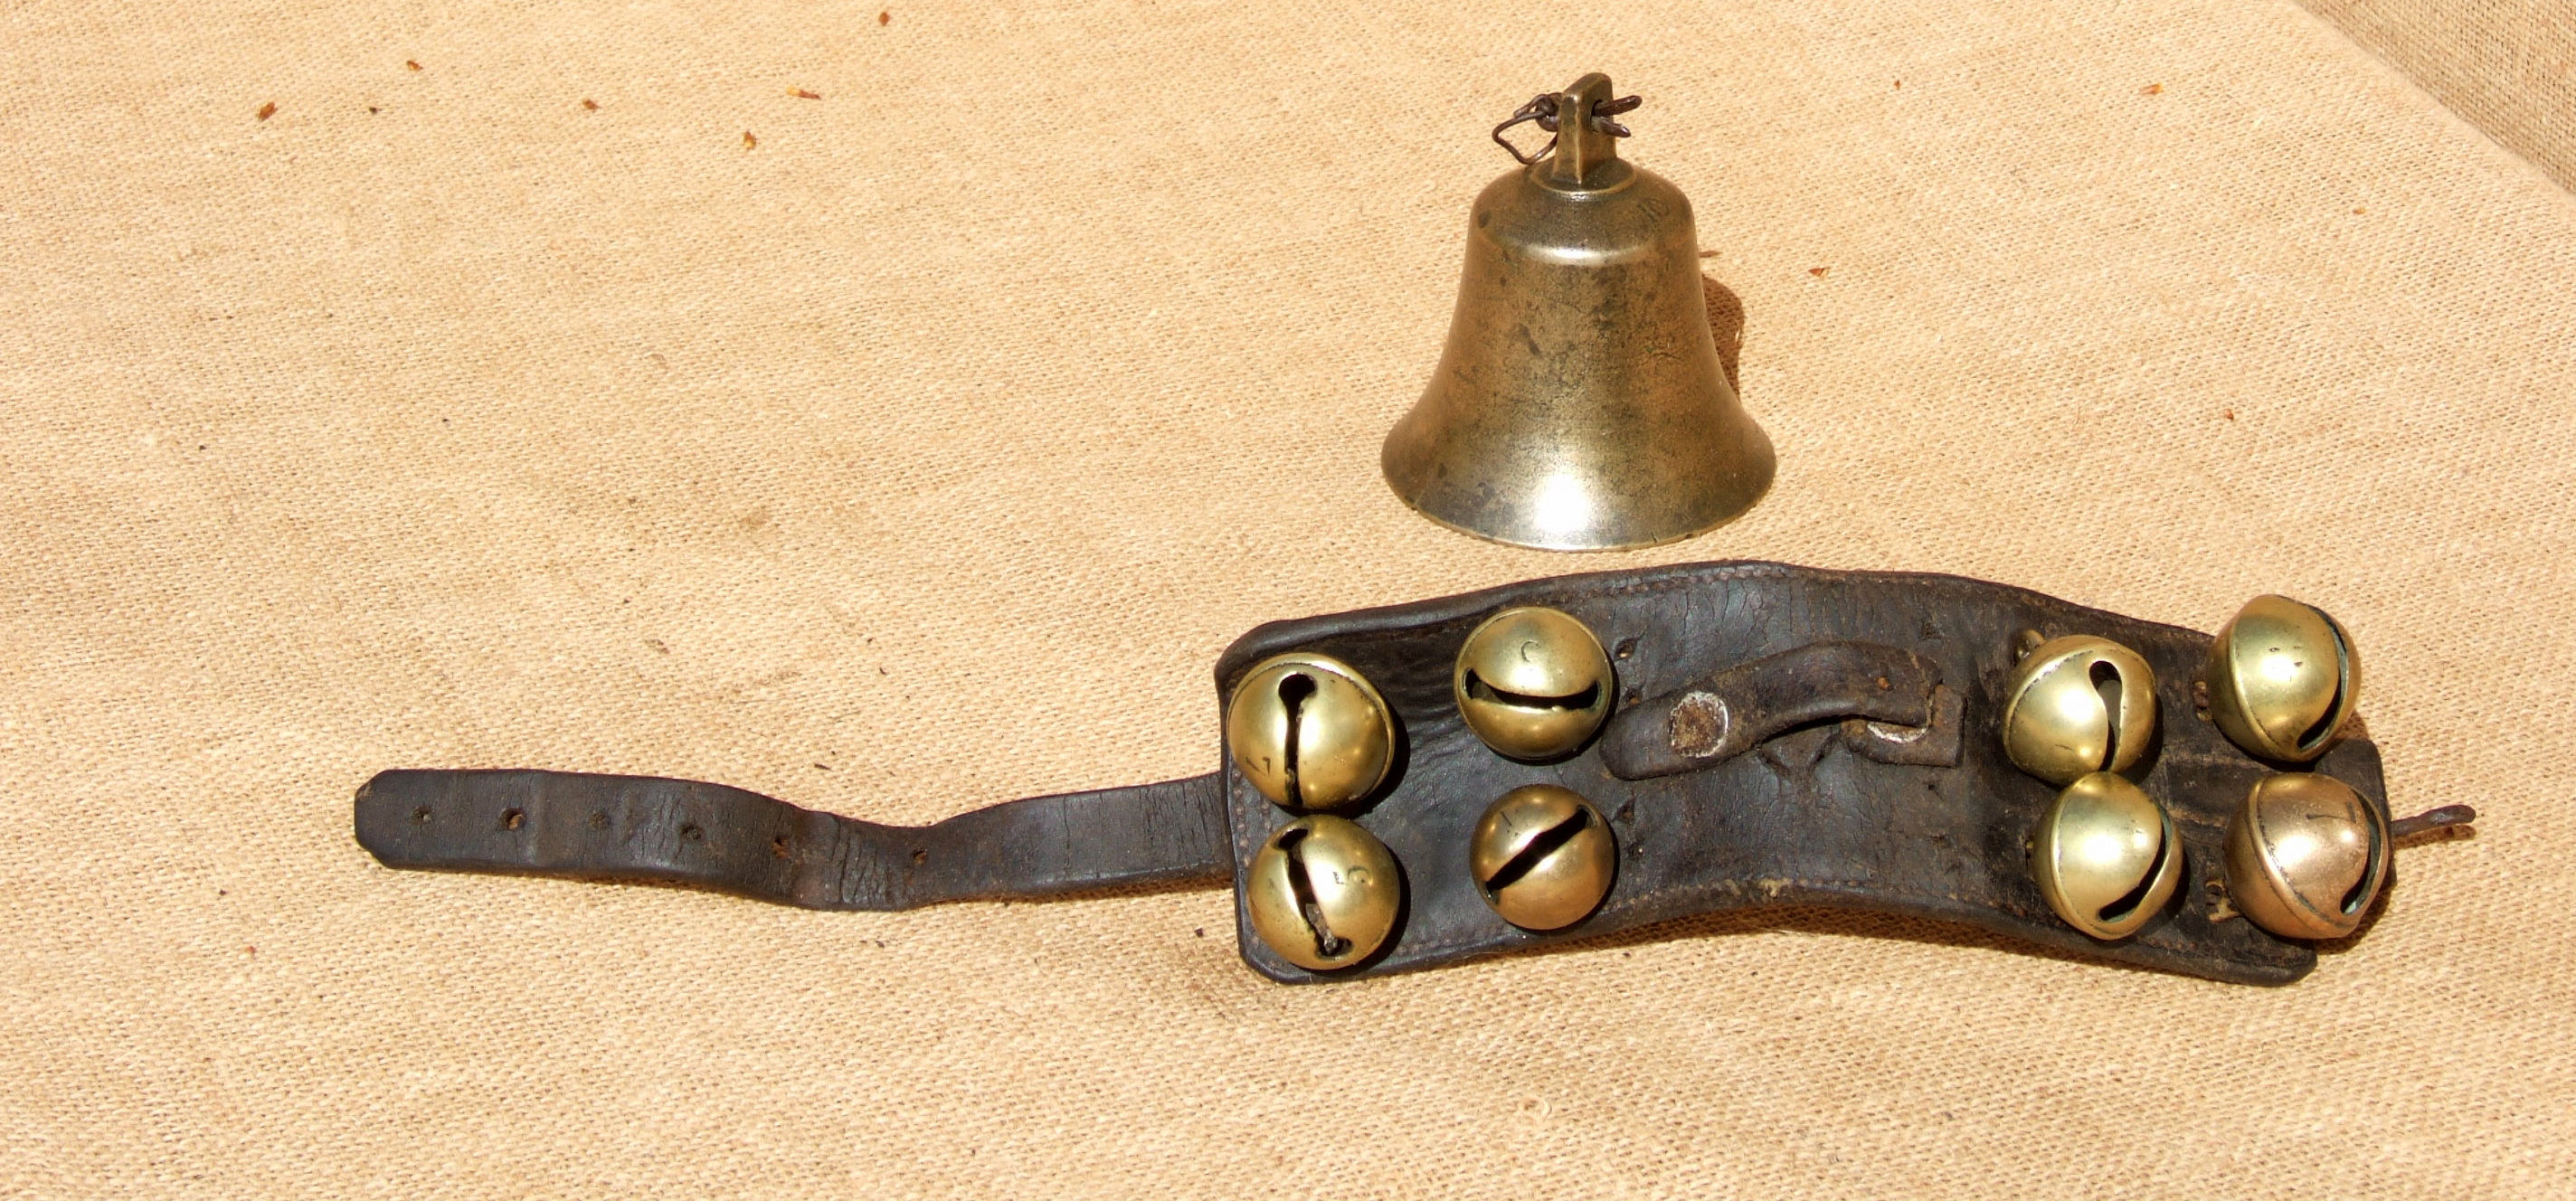 A LATTEN BELL AND EIGHT RUMBLER HARNESS BELLS. The 18th century latten bell is marked ‘RW’ and is